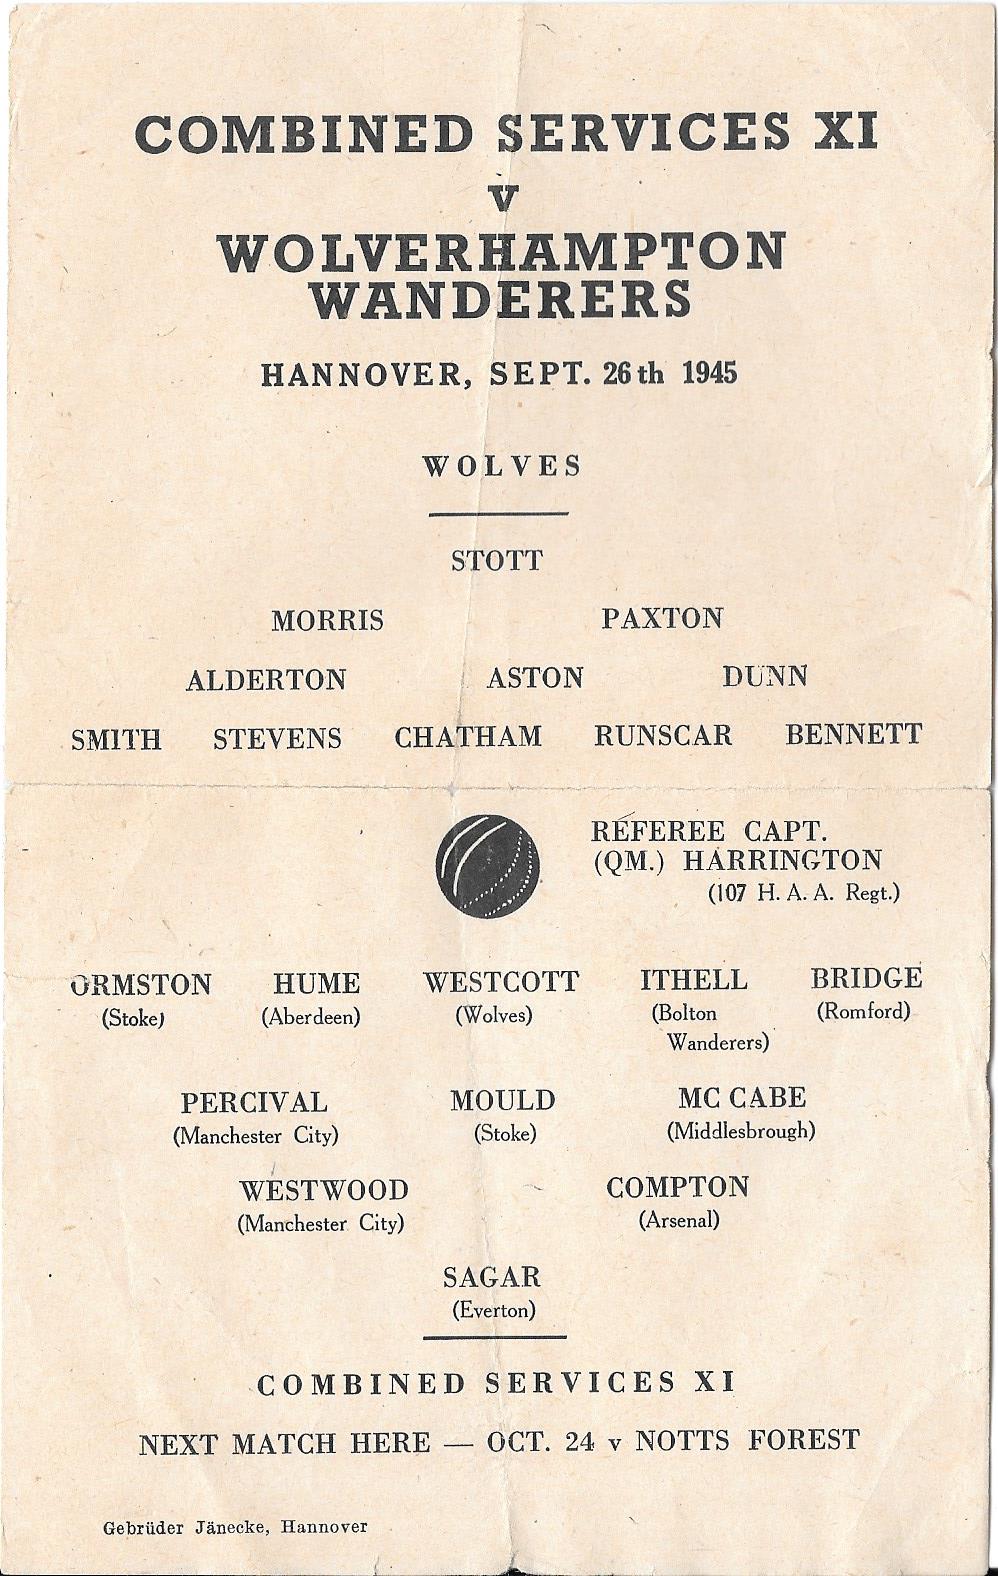 1945 COMBINED SERVICES XI V WOLVERHAMPTON WANDERERS